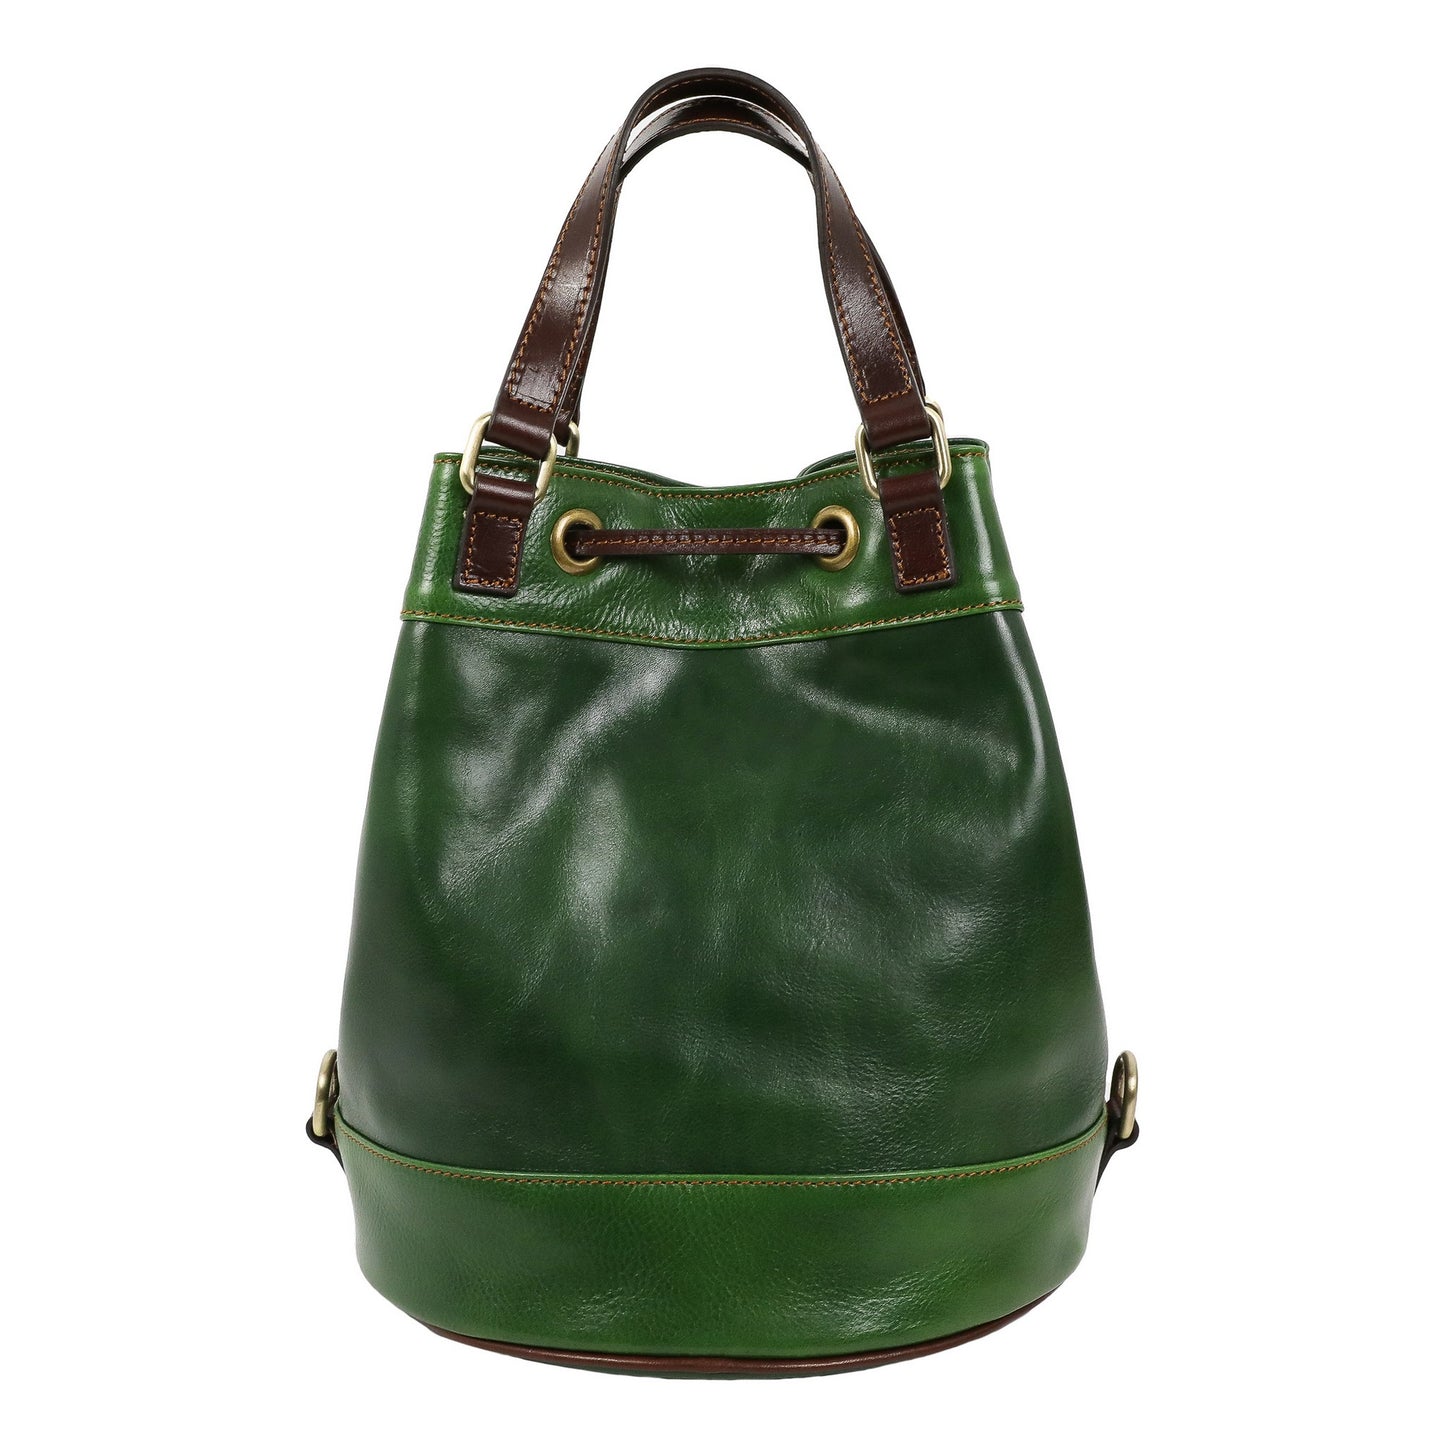 Leather Tote Bag - Light In August For Women Time Resistance   